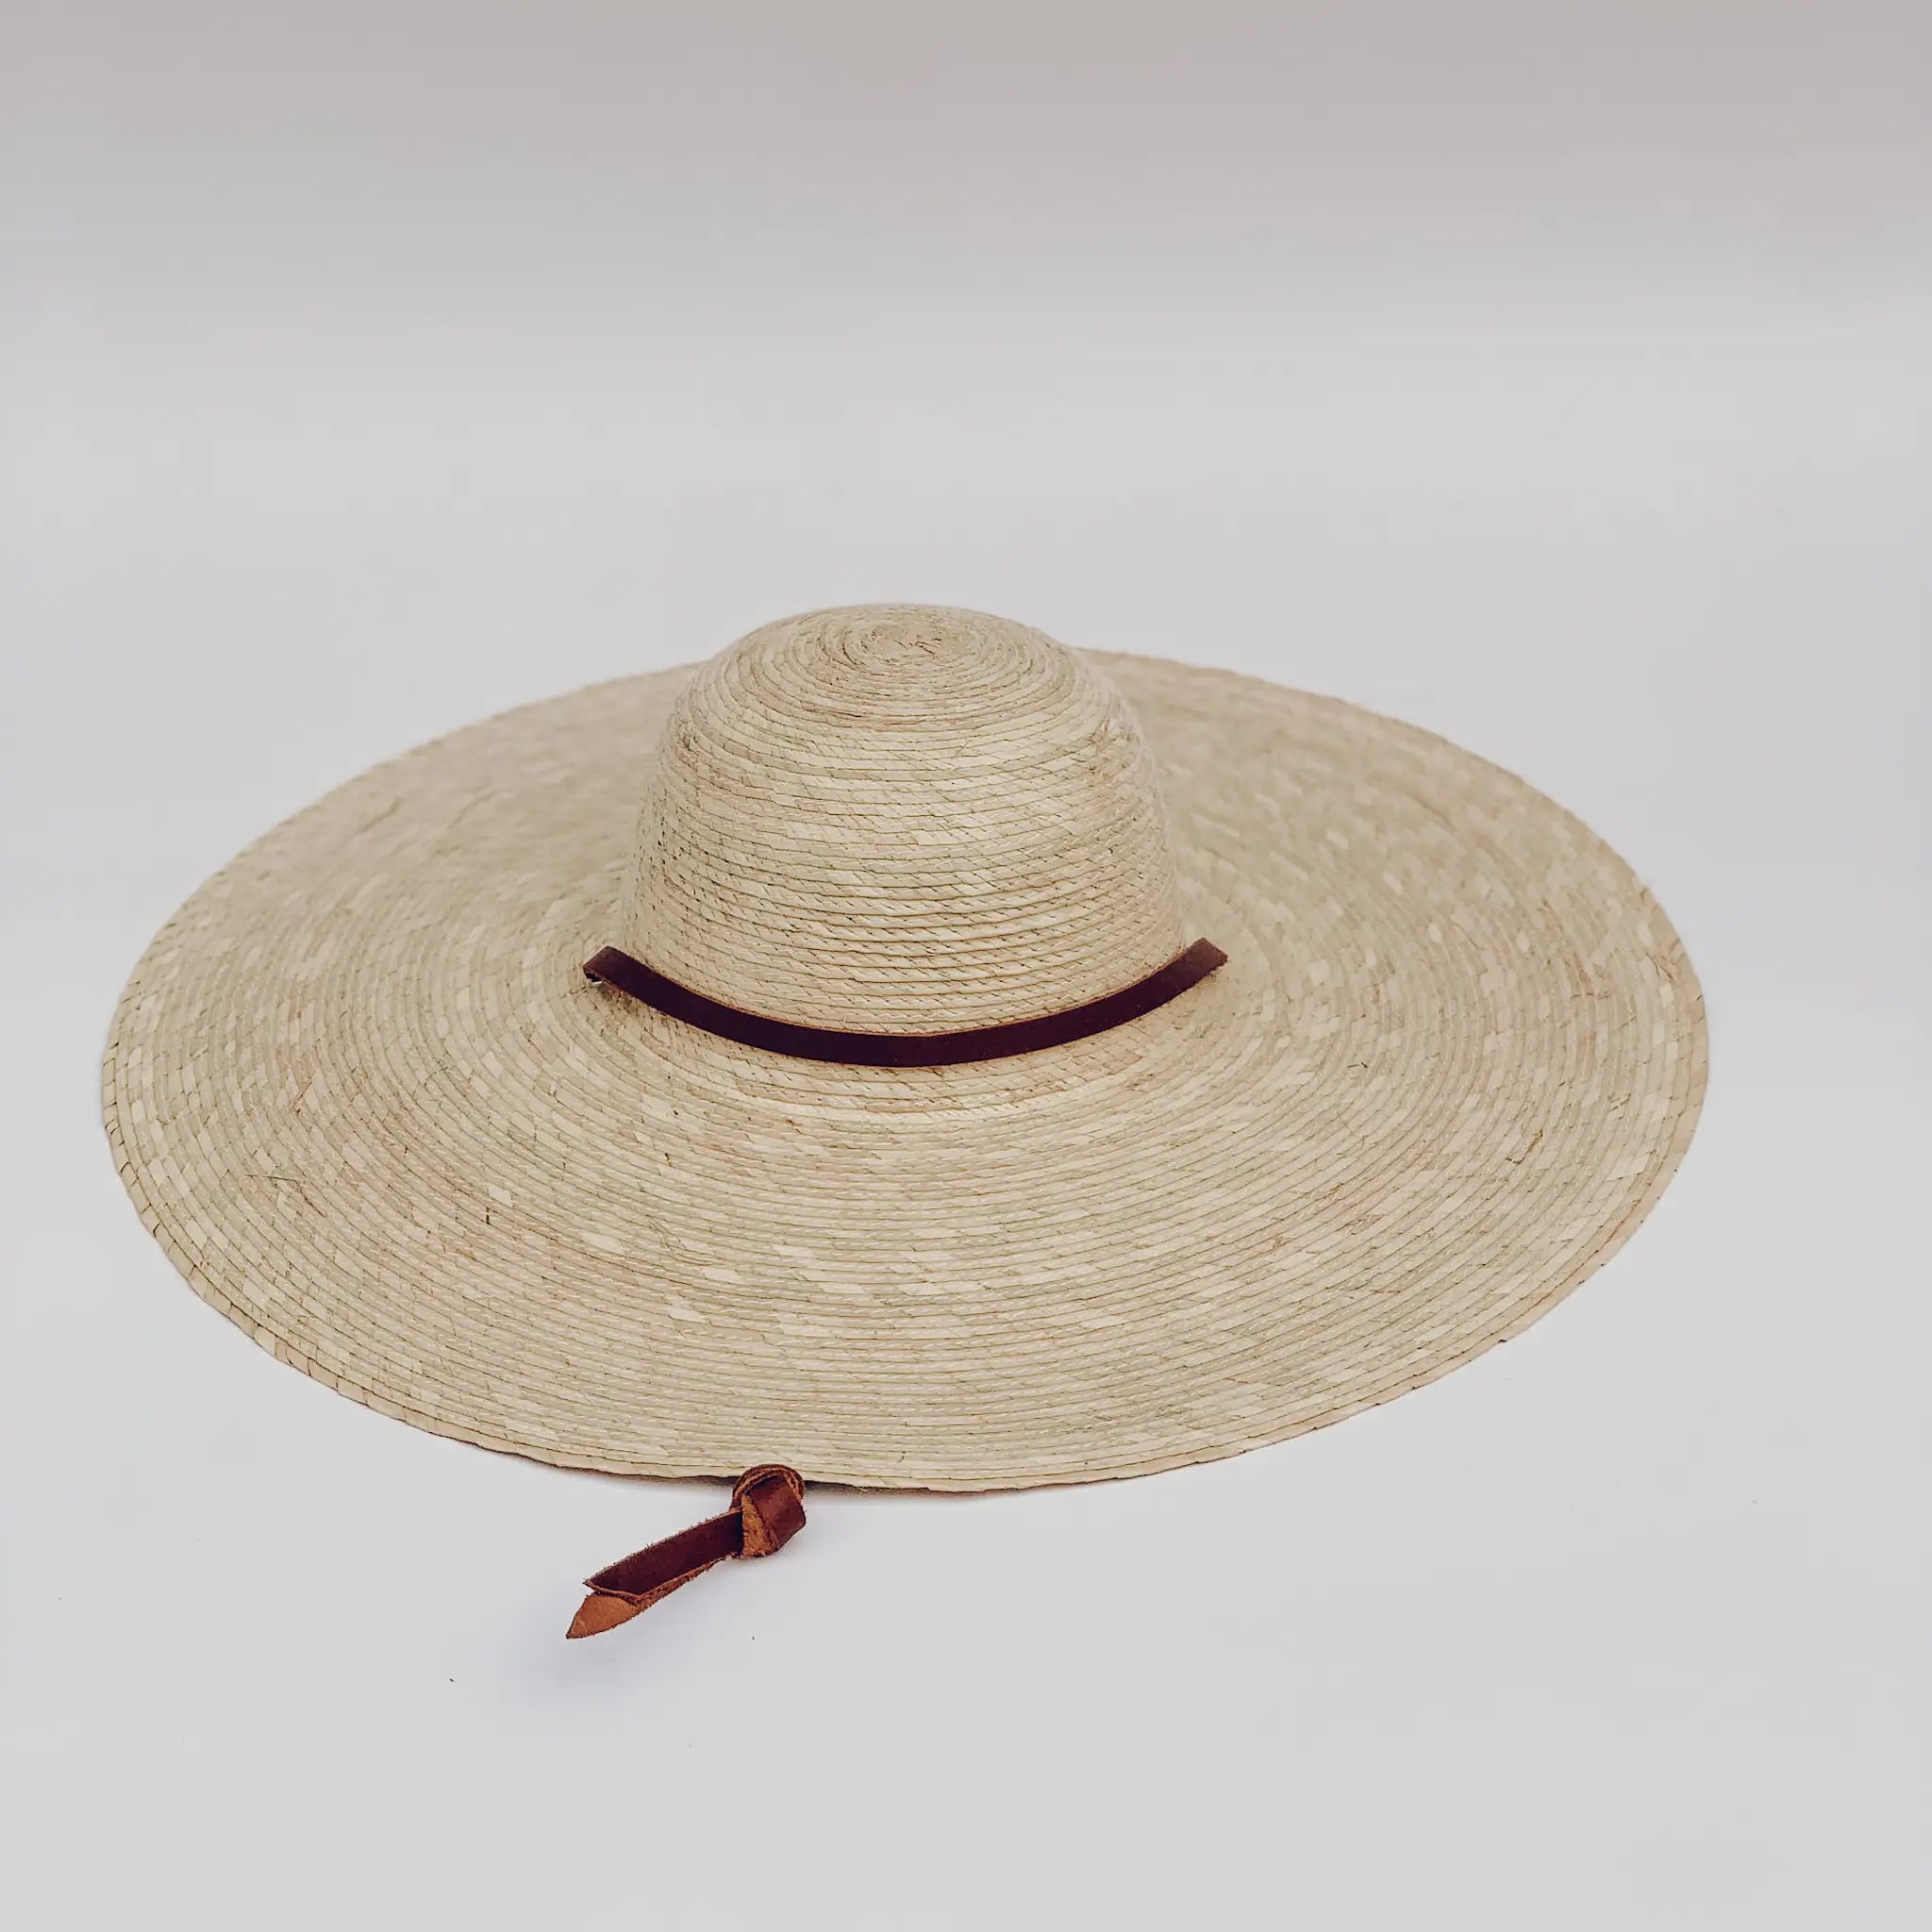 solstice straw sun hat by LEAH